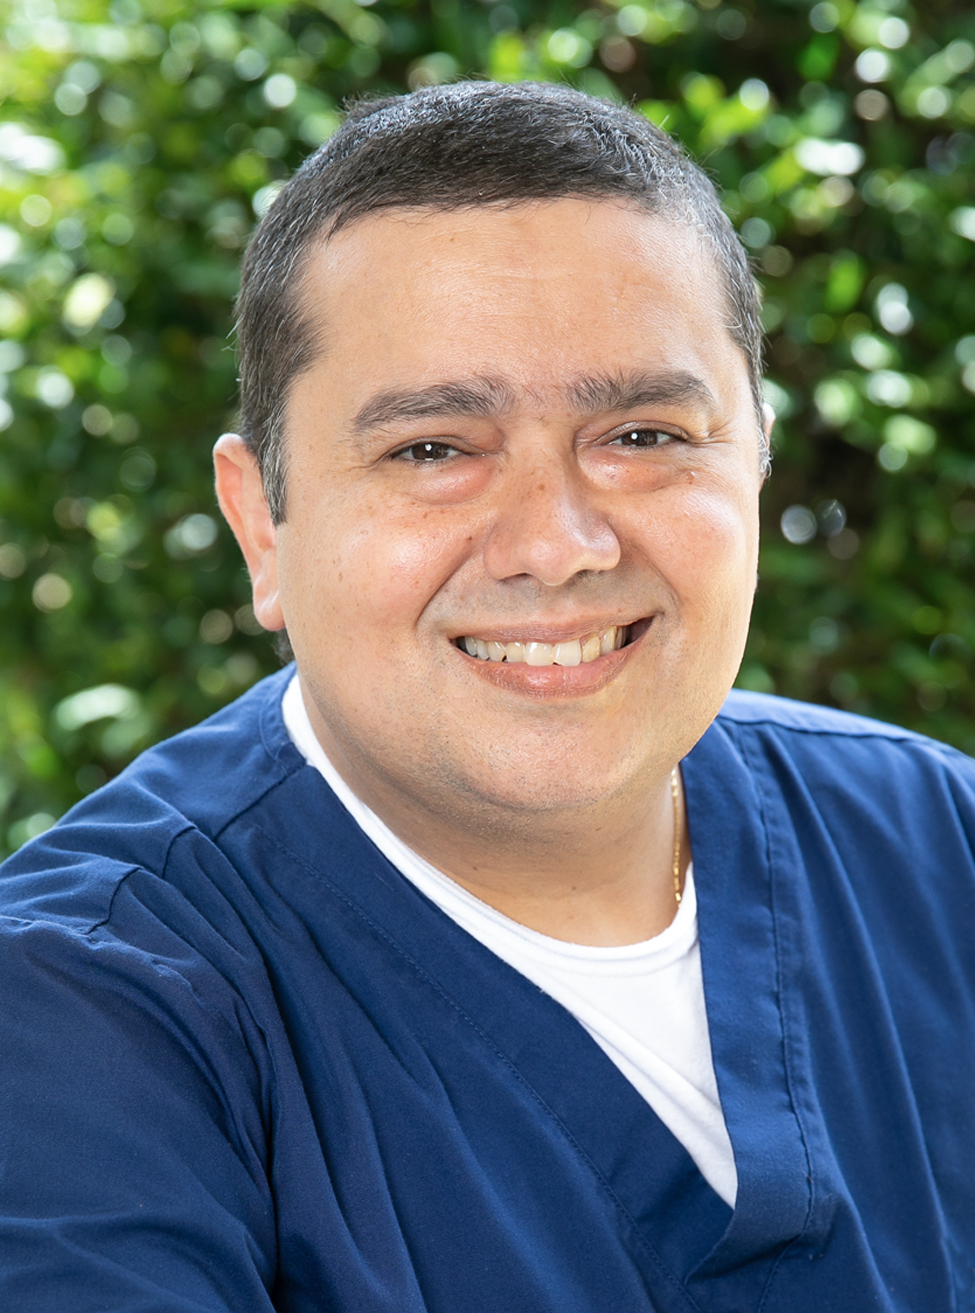 Dr. Jayme A. Oliveira Filho, D.D.S., FAGD, FICOI is Honored by the Top 100 Doctors as the 2022 Dentist of the Year in the State of Virginia